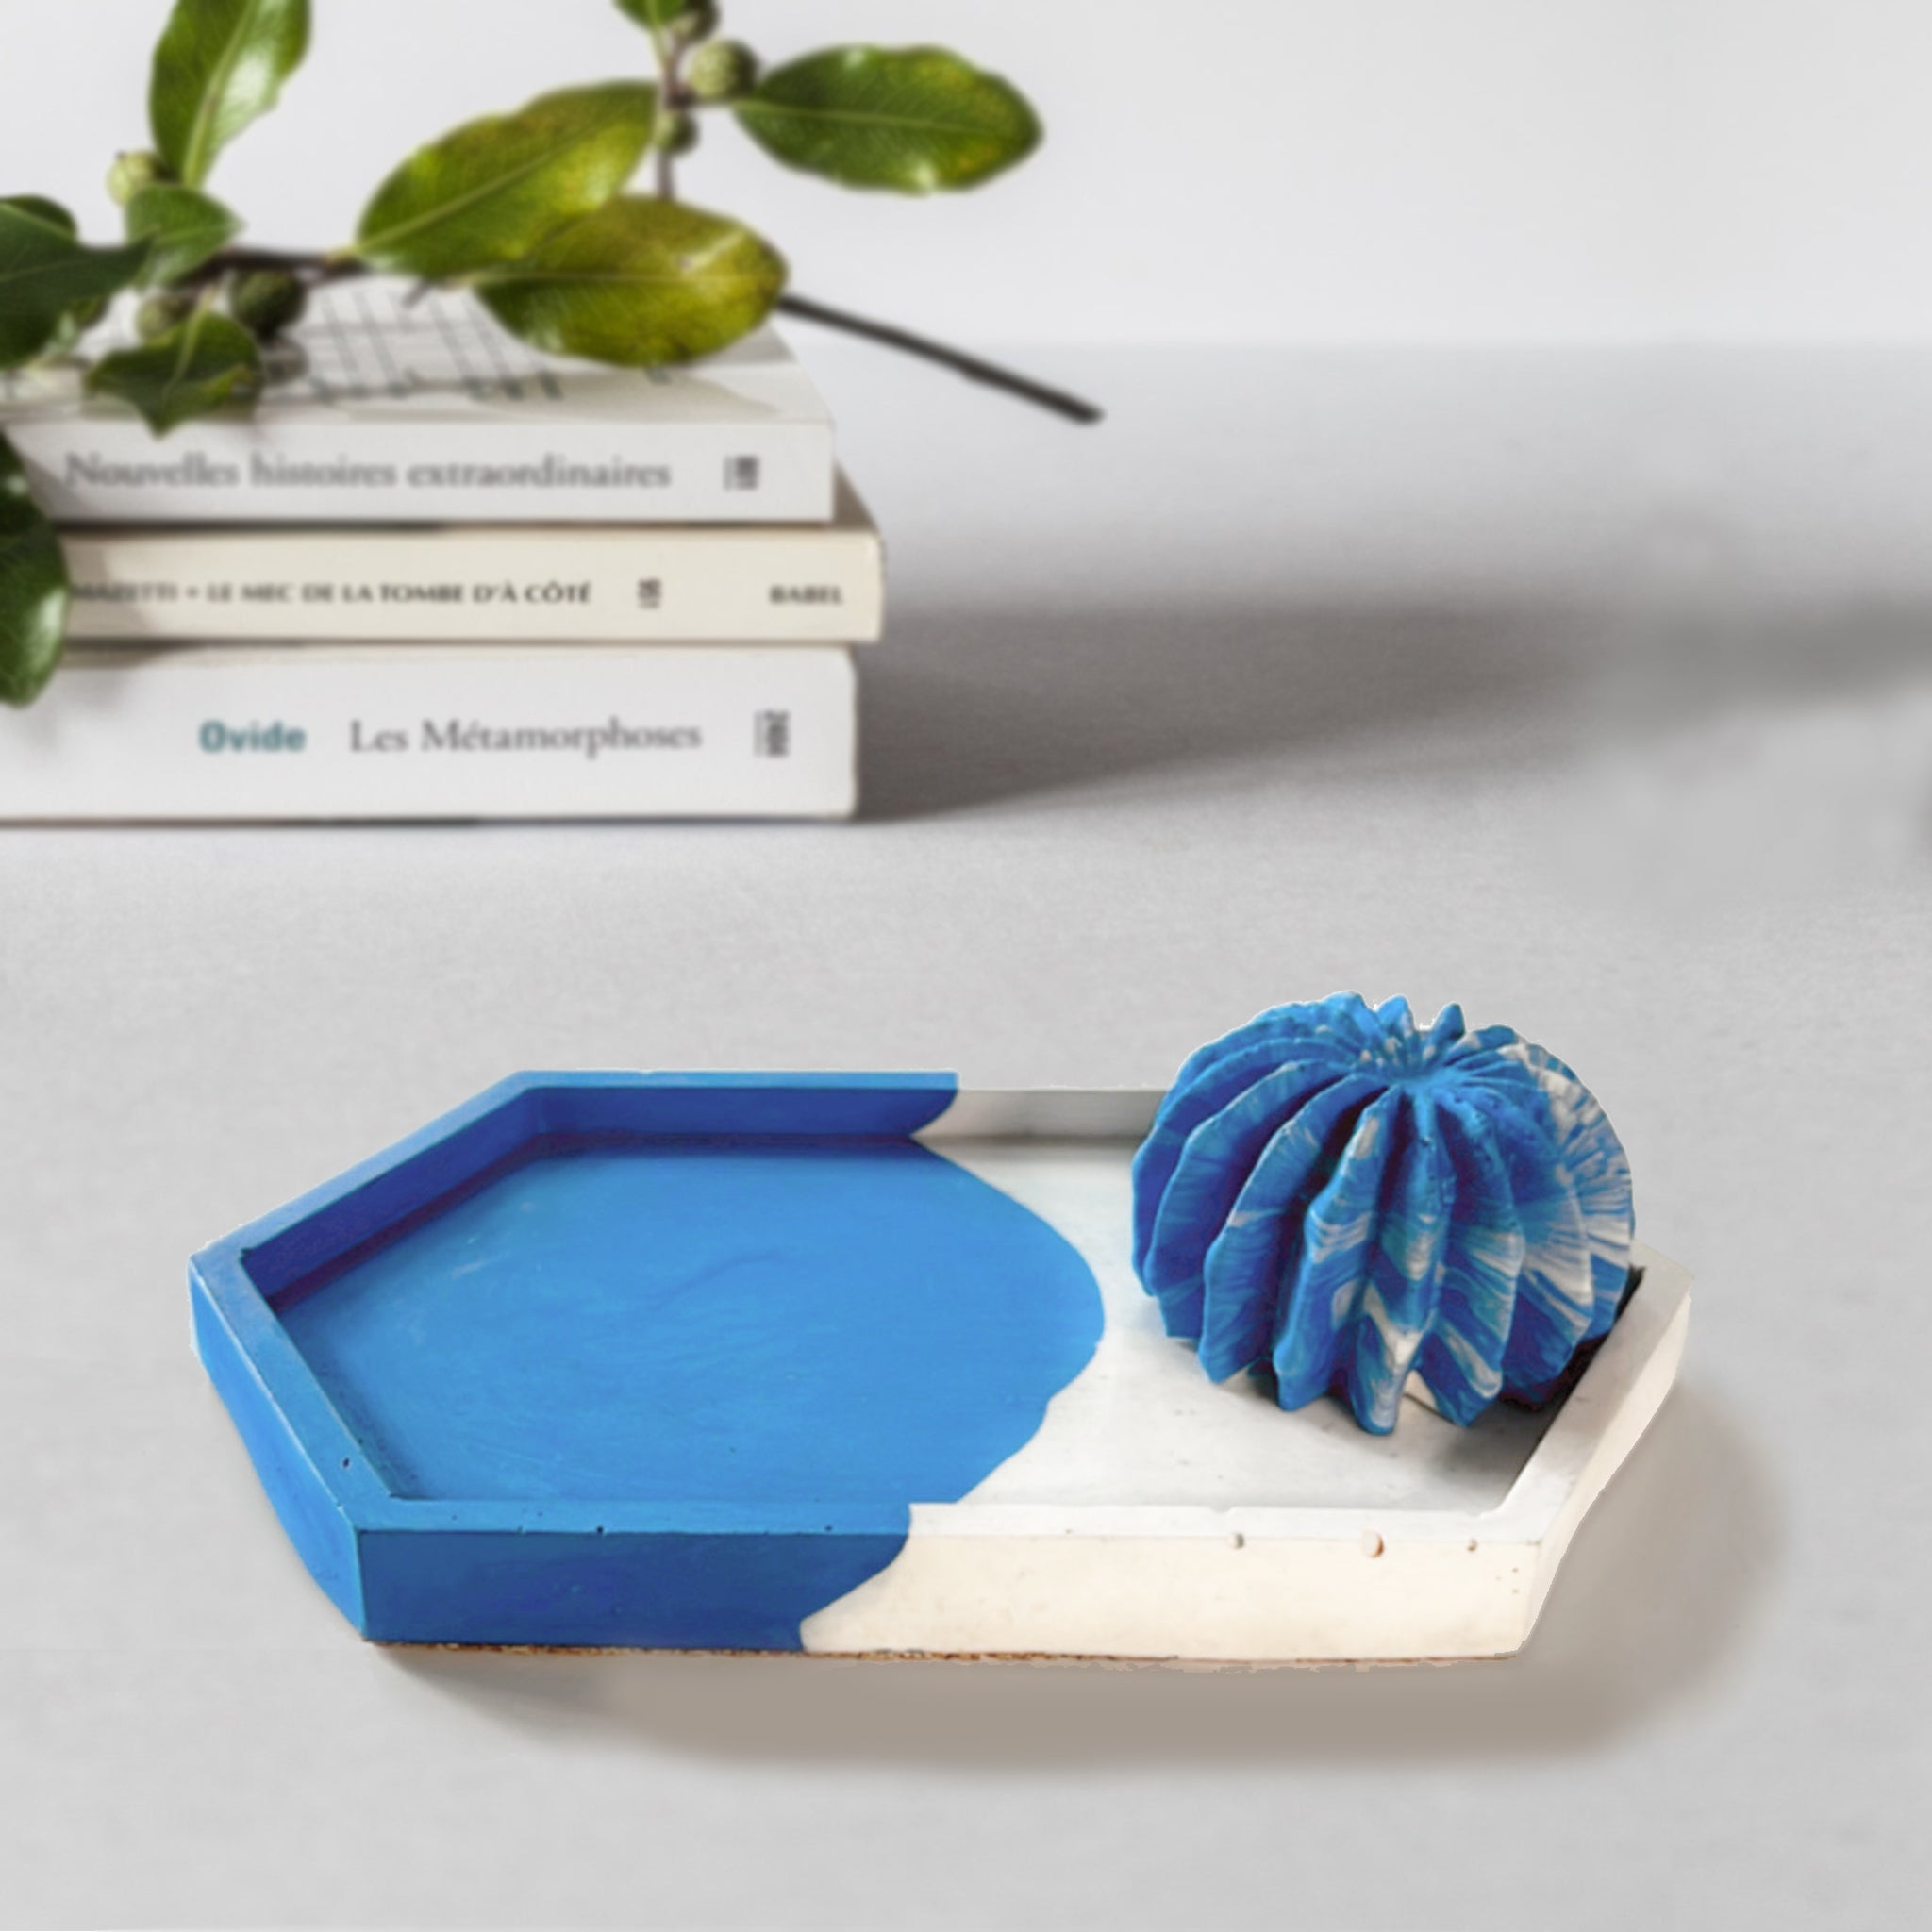 ReStory Eco-resin trinket and candle tray organiser - hexagon shape with a cactus